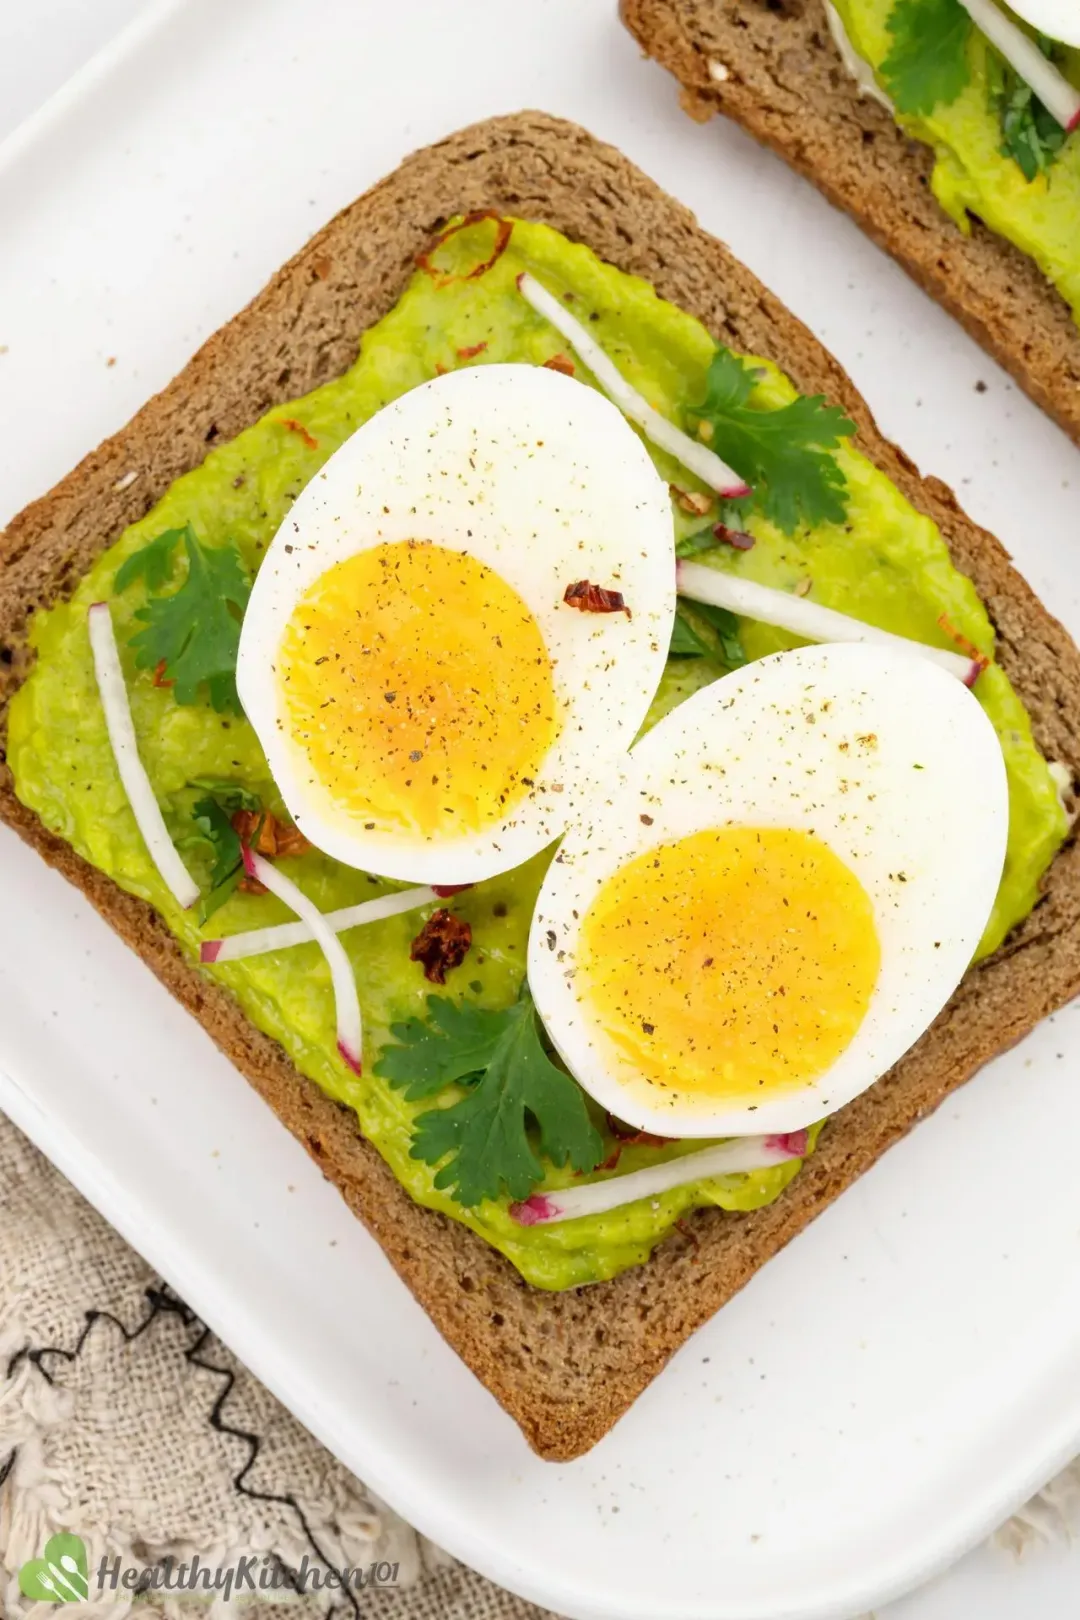 A top-down shot of two boiled egg slices on top of a slice of avocado toast, garnished with chili flakes and white radish